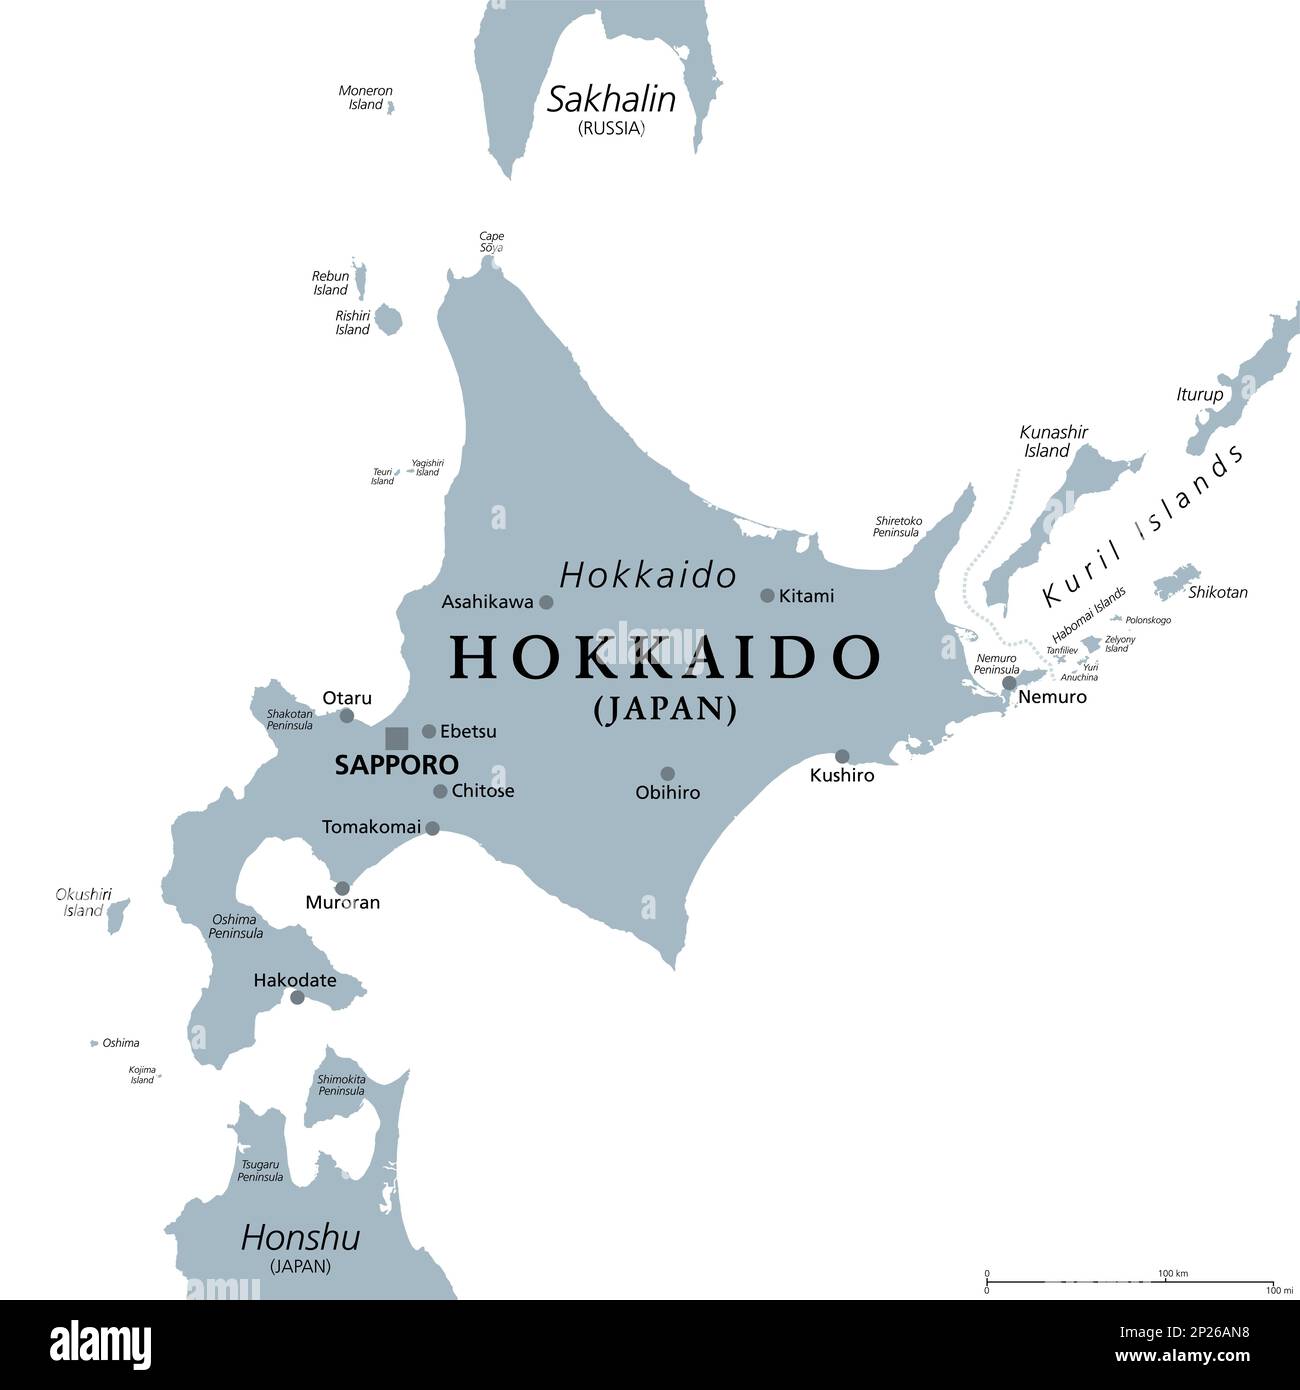 Hokkaido, second largest island of Japan, gray political map, with capital Sapporo. The largest and northernmost prefecture, making up its own region. Stock Photo